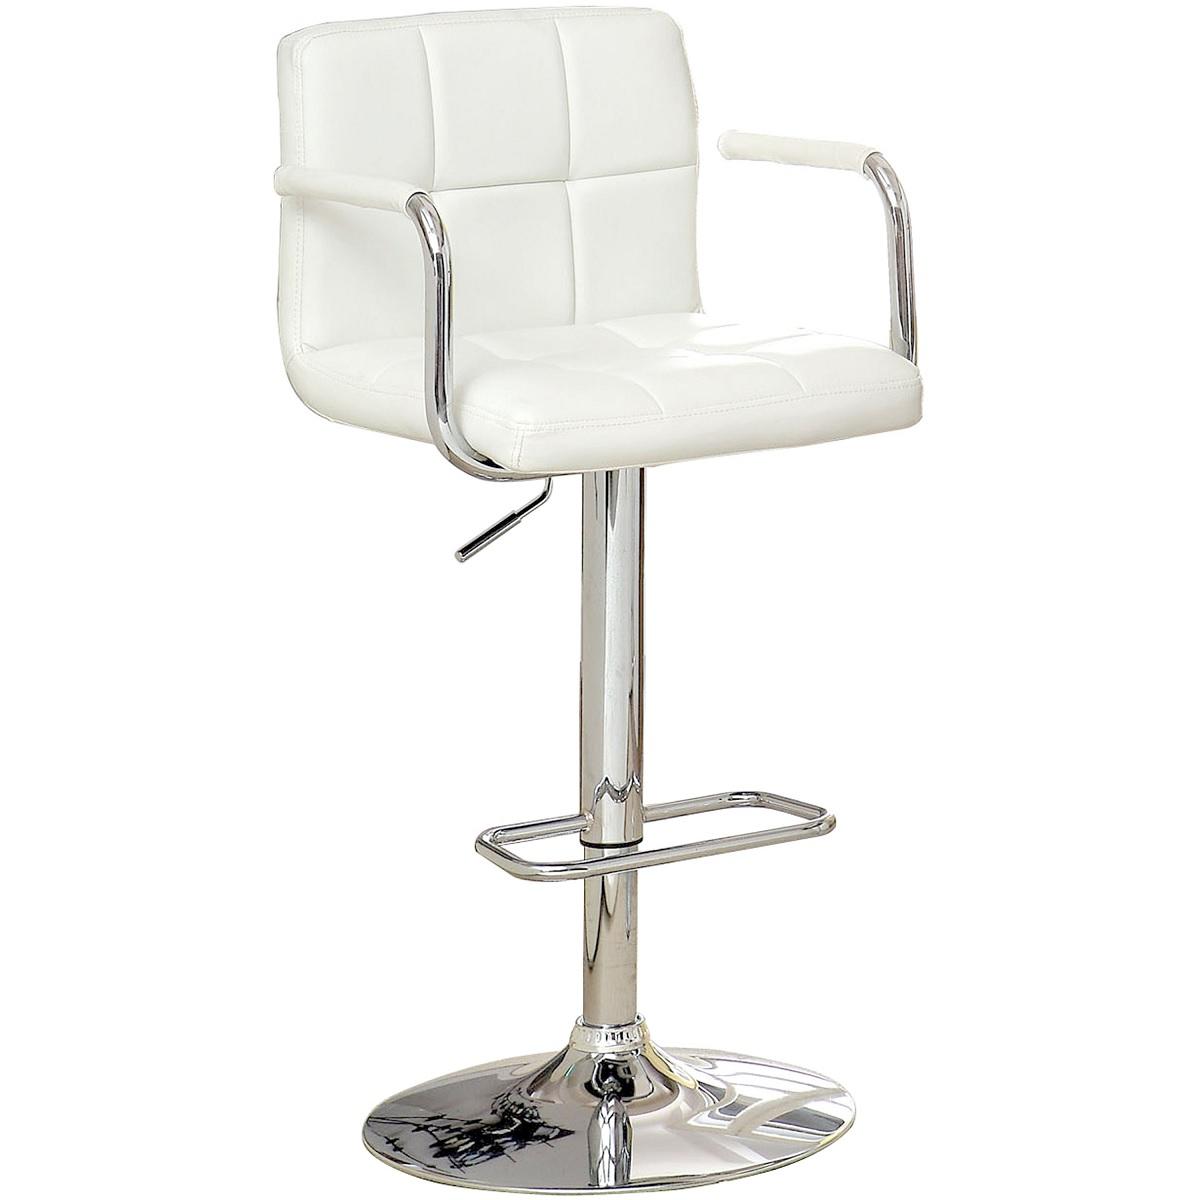 Contemporary Bar Stool CM-BR6917WH Corfu CM-BR6917WH in White Leatherette